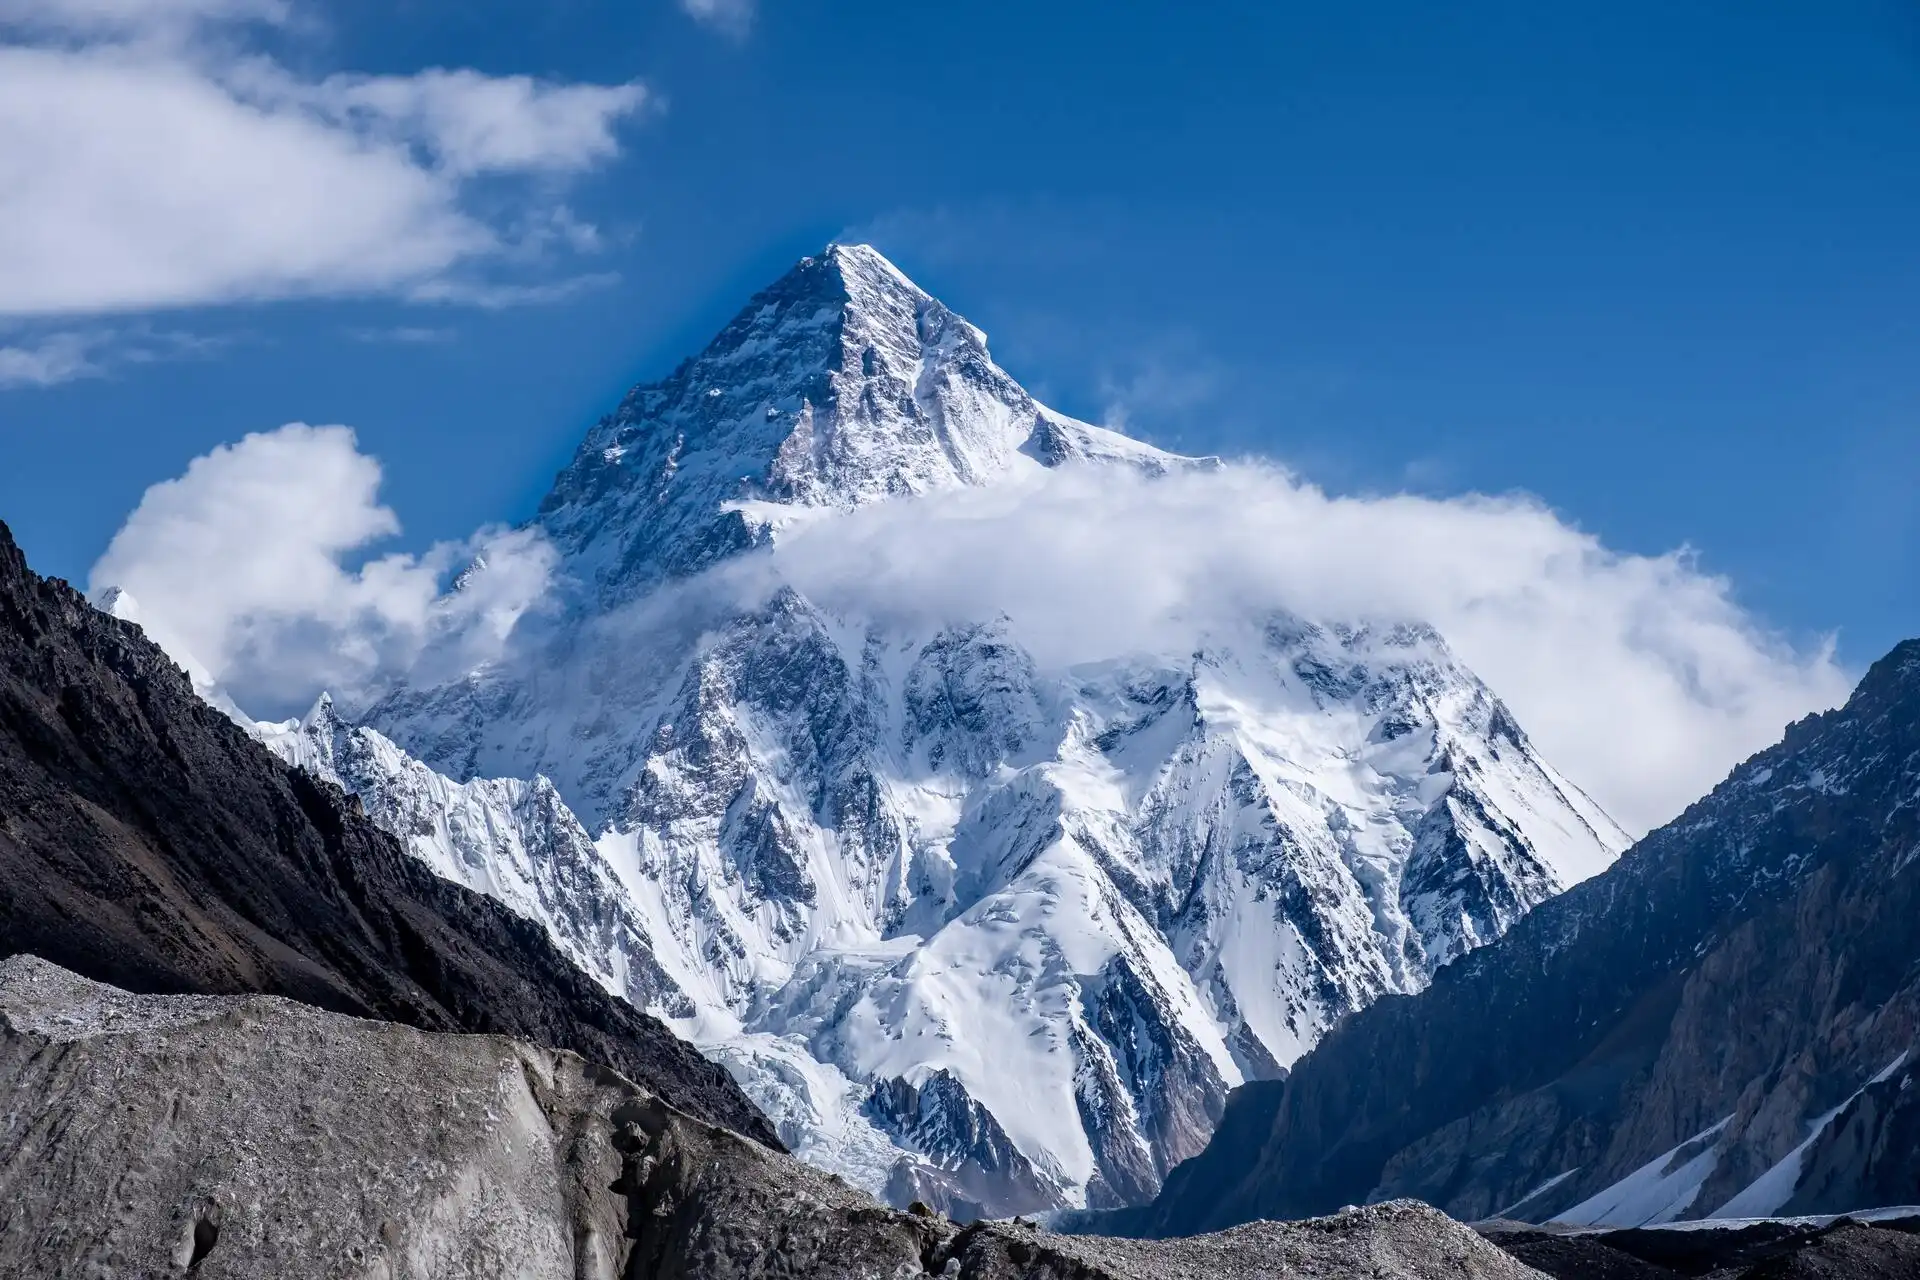 A mountaineer’s guide on how to prepare for the world’s most dangerous peak